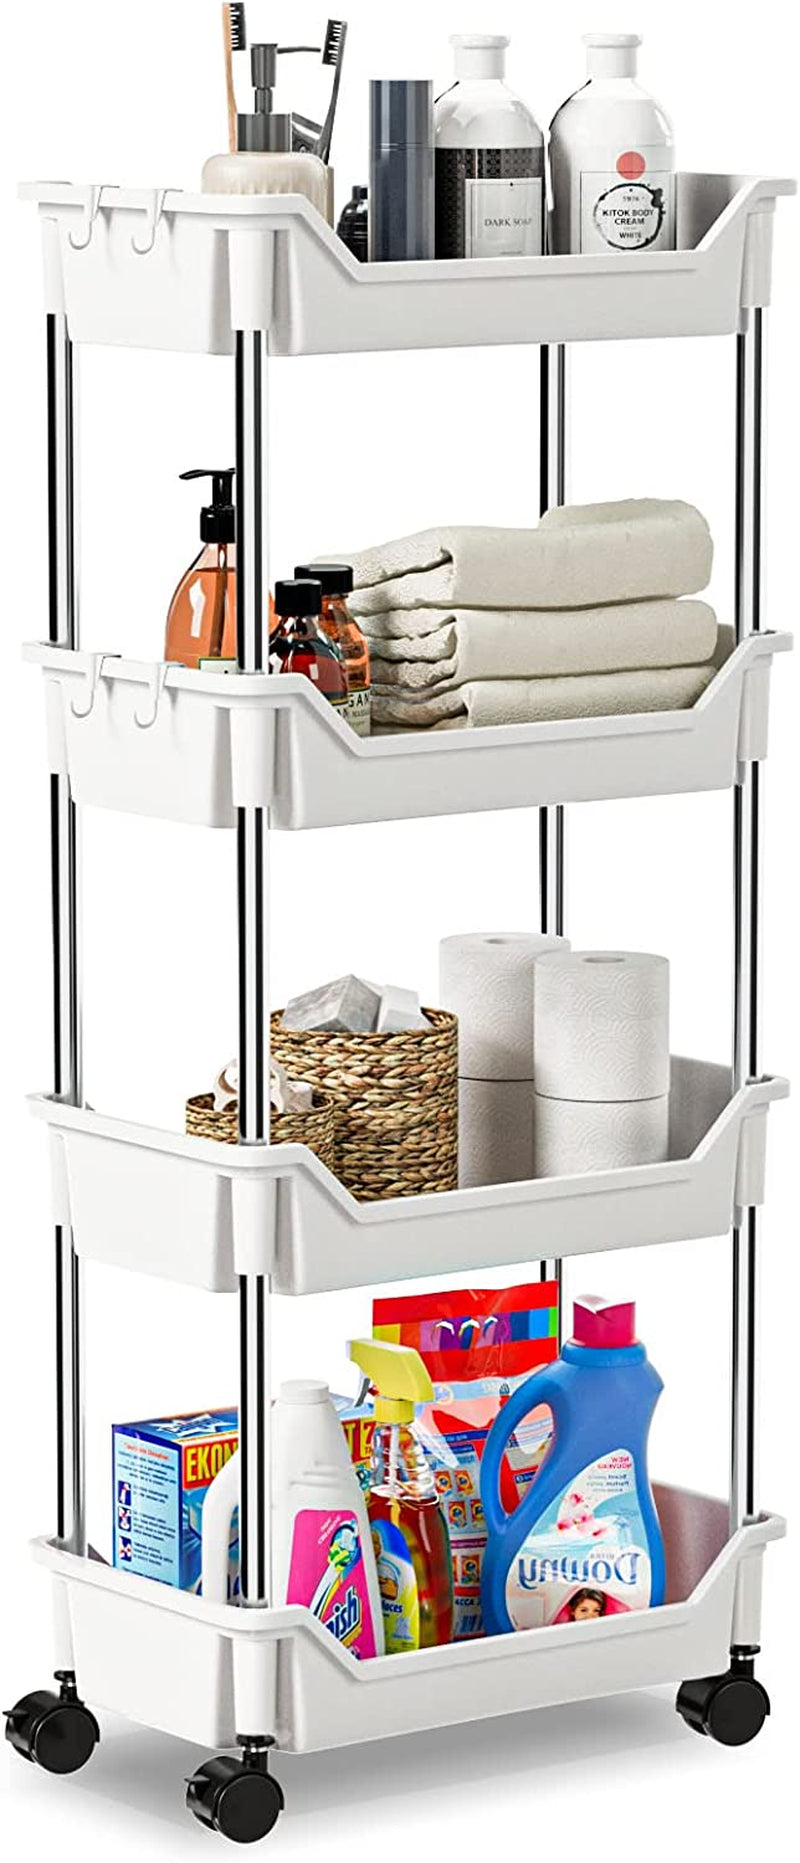 OTK Slim Storage Cart 3 Tier Mobile Shelving Unit Organizer, Utility Rolling Shelf Cart with Wheels for Bathroom Kitchen Bedroom Office Laundry Narrow Places，White Home & Garden > Household Supplies > Storage & Organization OTK 4-Tier-White Wide Plus 